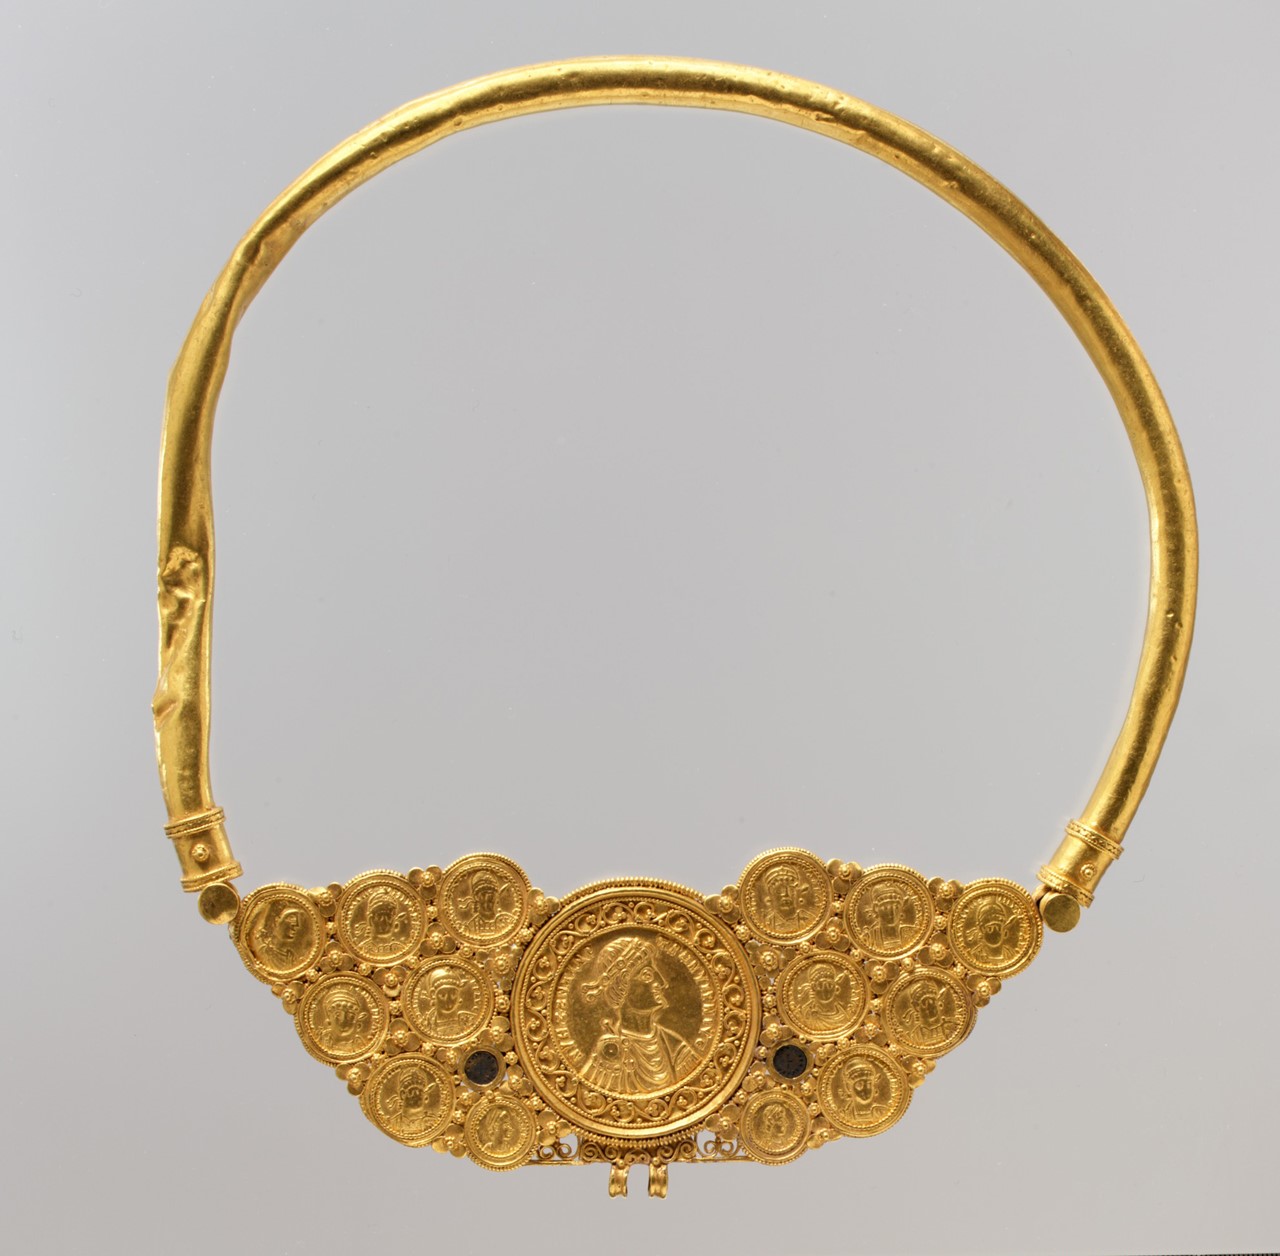 Pectoral with coins and pseudo-medallion, Byzantine, ca. 539–50. This pectoral necklace is composed of a plain, hollow neck ring attached to a frame set with a large central medallion flanked by coins and two small decorative disks. https://www.metmuseum.org/art/collection/search/464070